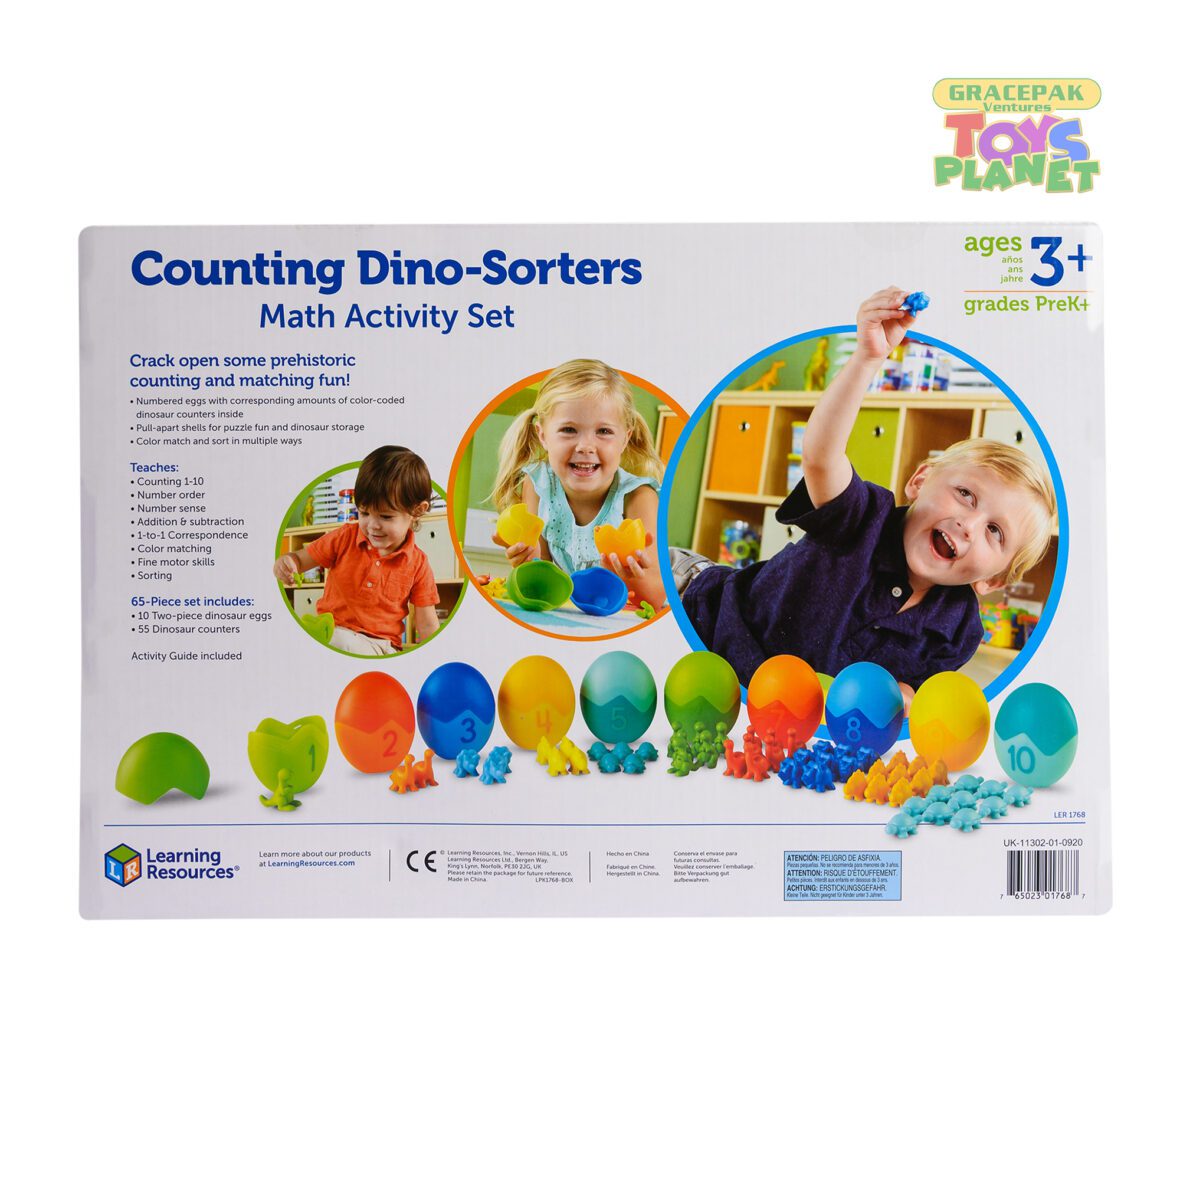 Learning Resources_Counting Dino-Sorters Maths Activity Set_3